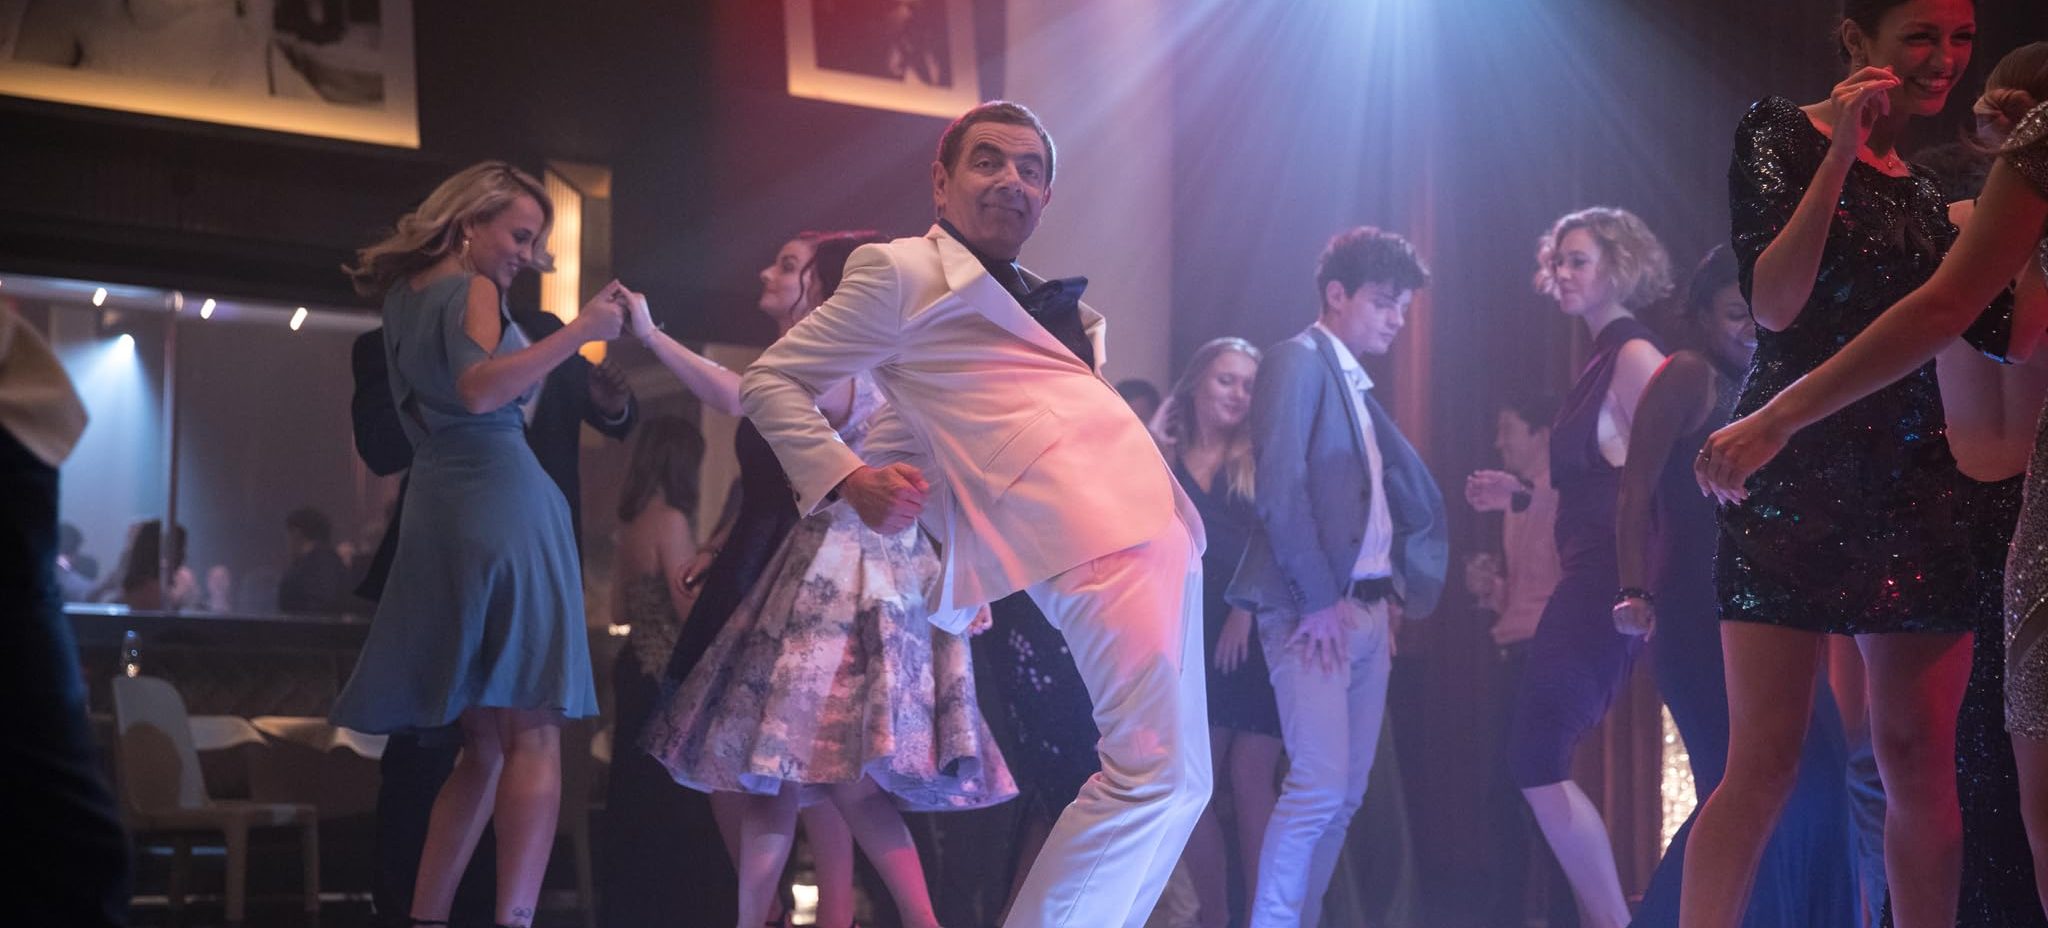 Rowan Atkinson’s Johnny English 4 Confirmed; Starts Filming in the UK and Malta in June